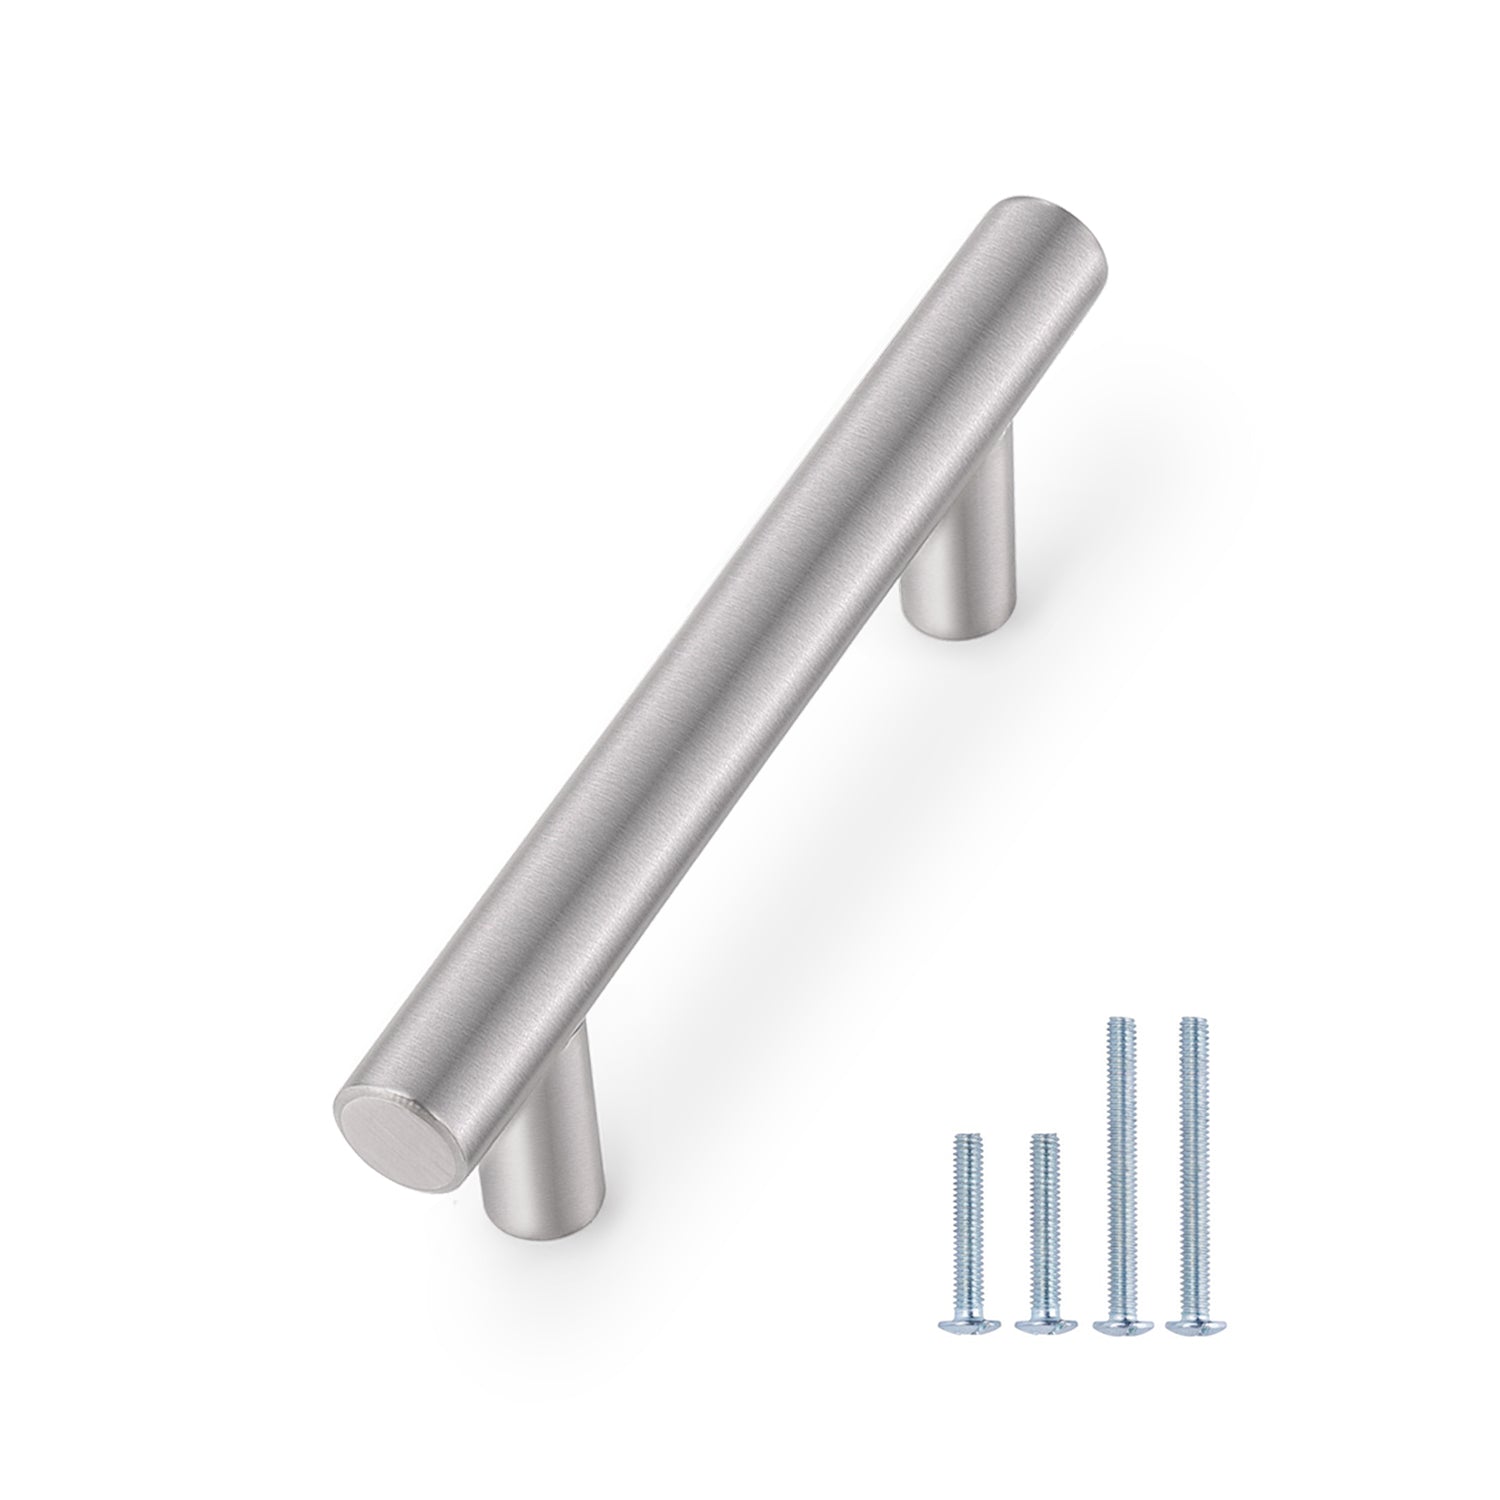 Probrico Stainless Steel Cabinet Handles Brushed Nickel Kitchen Hardware Drawer Pulls 3" PD201HSS76-1000 pack